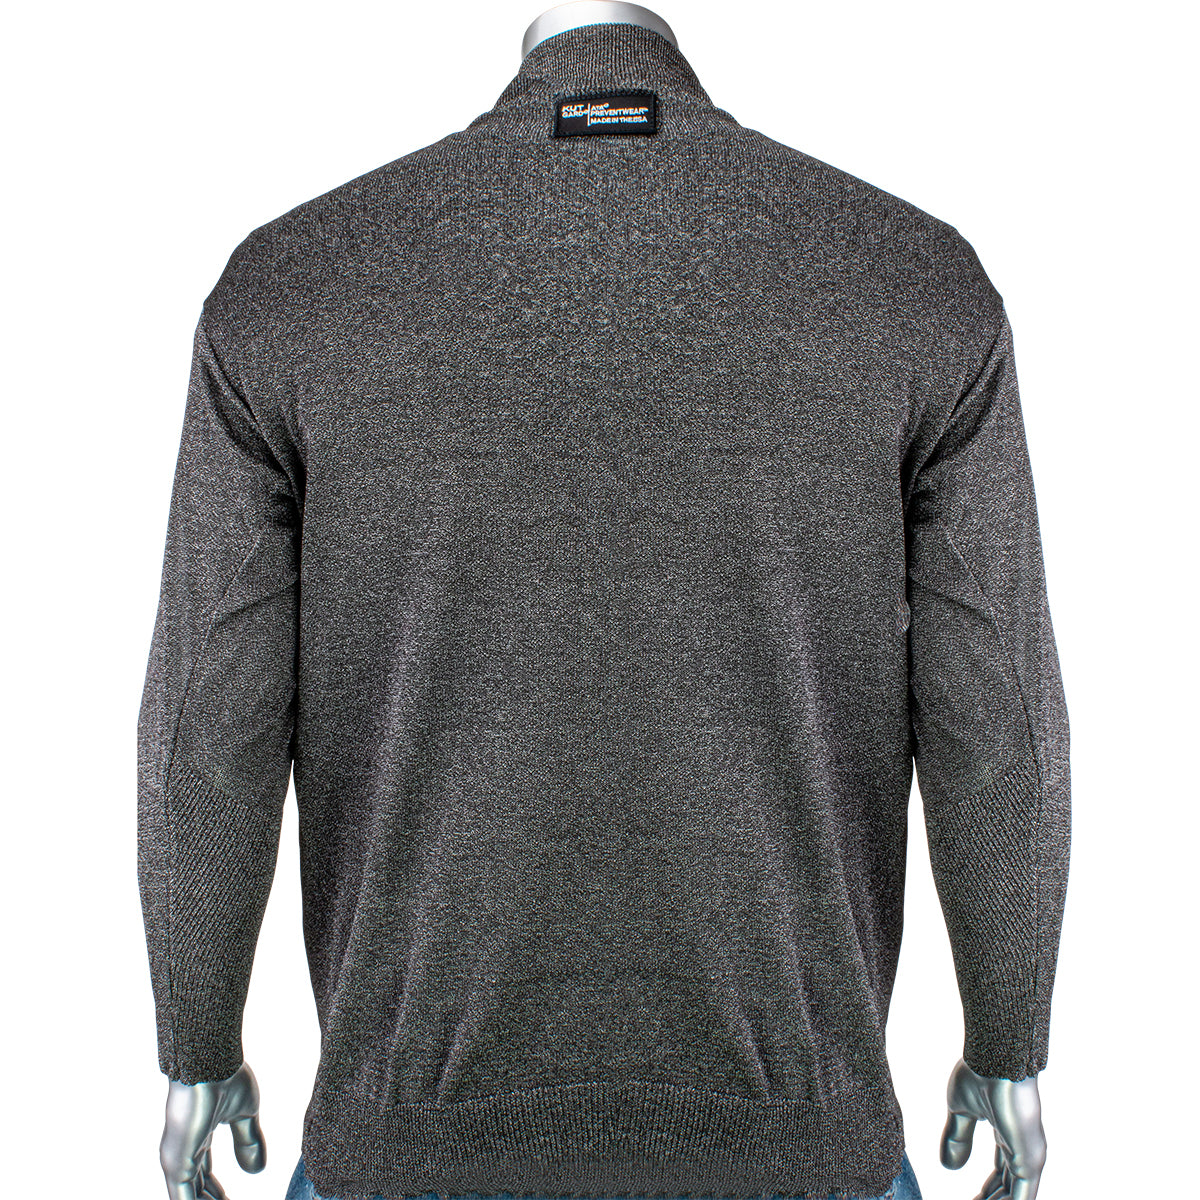 PIP P100SP-2XL ATA Blended Cut Resistant Pullover